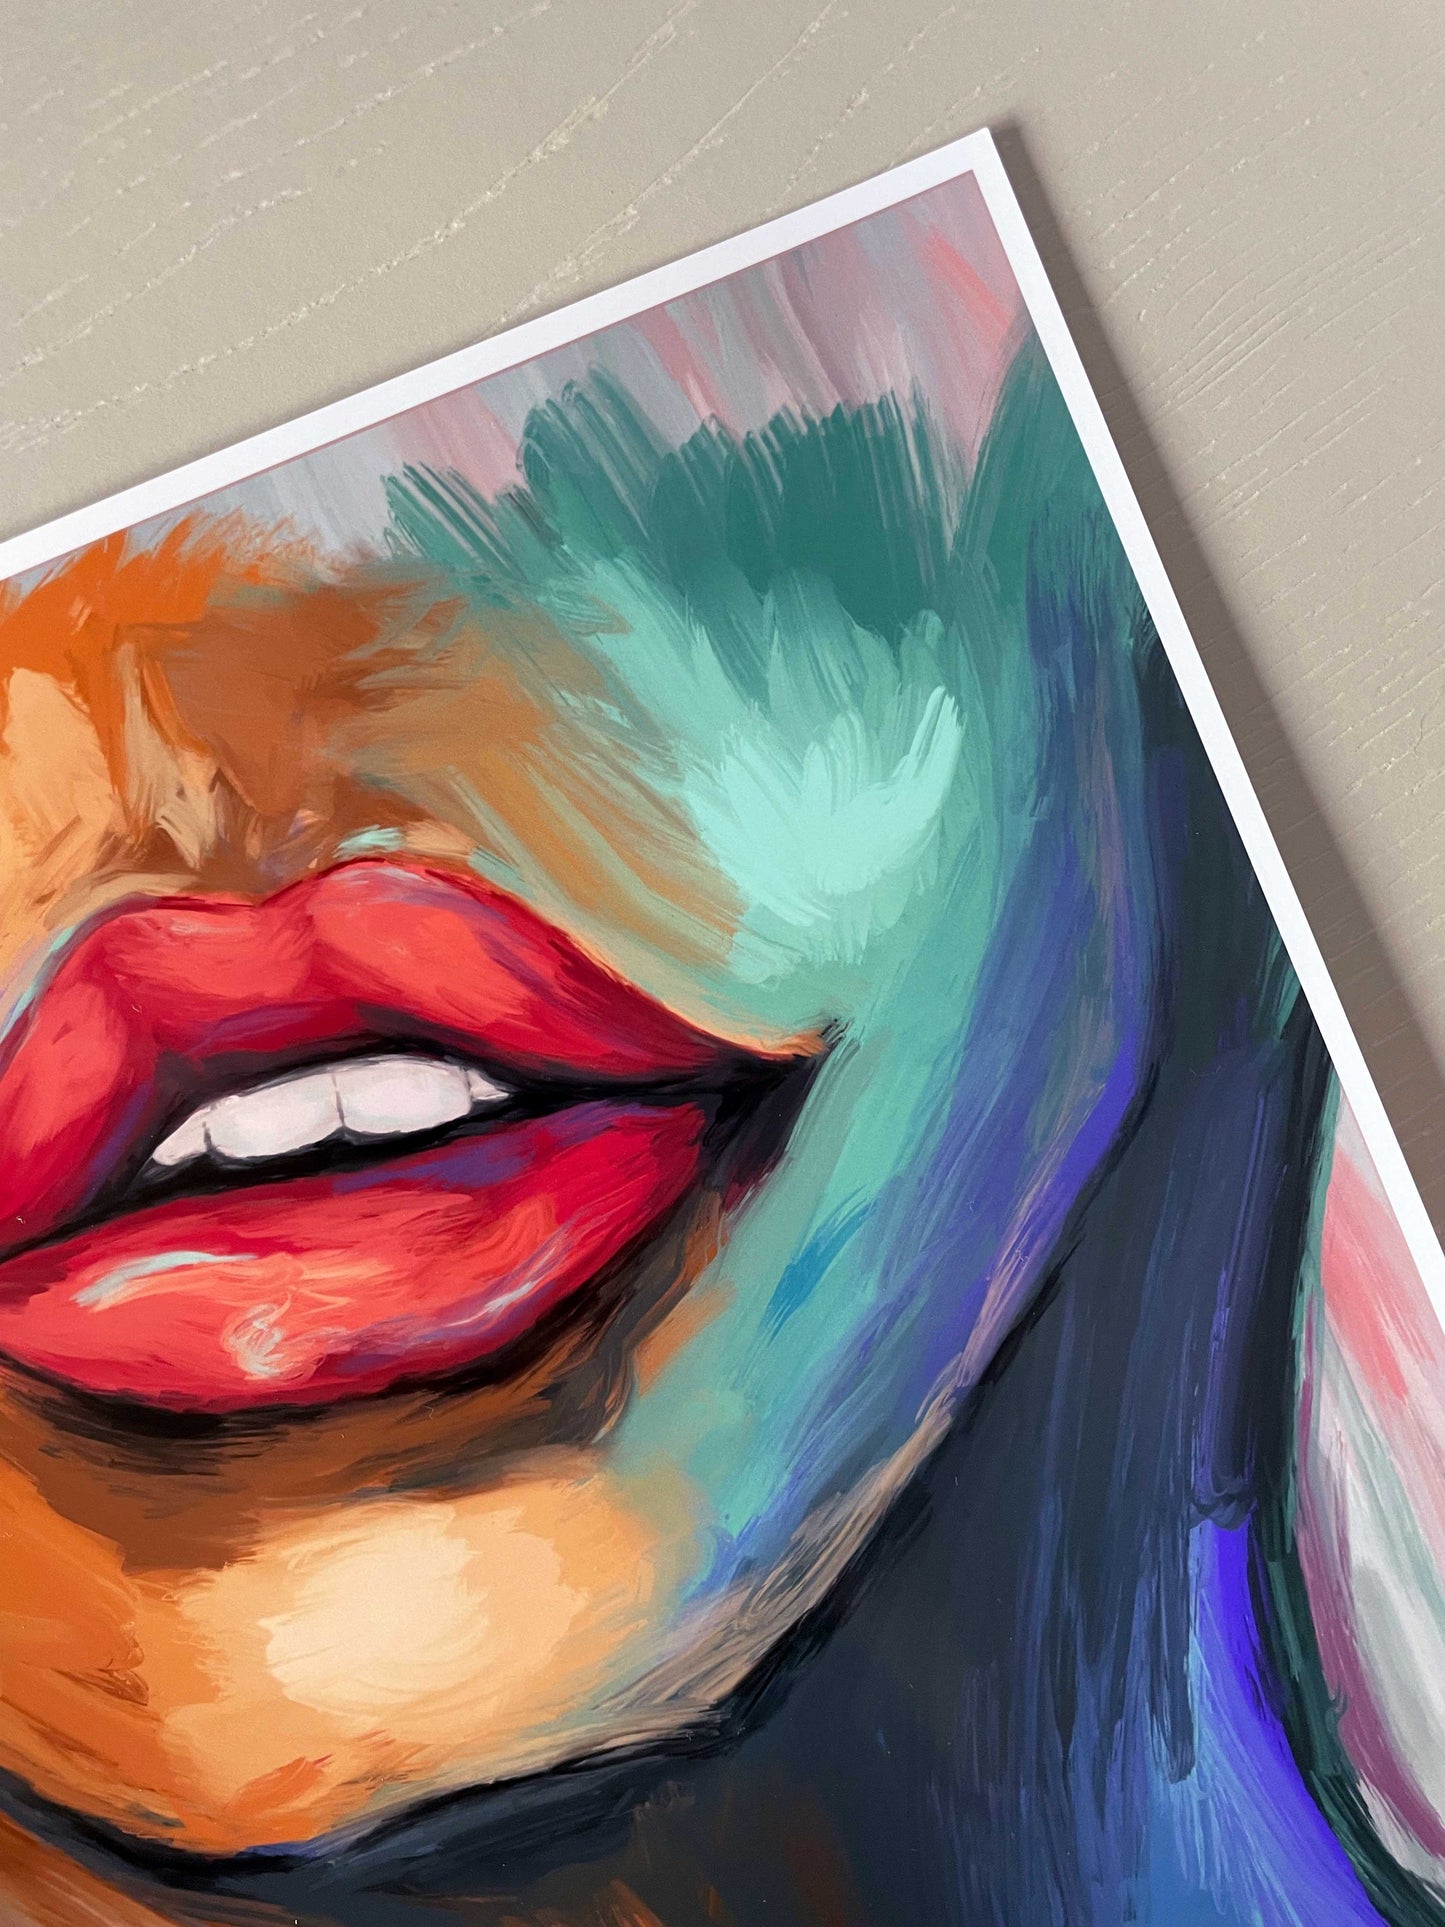 Oil Painting Female Lips Print | Poster Decor Wall Art Print | A2 A3 A4